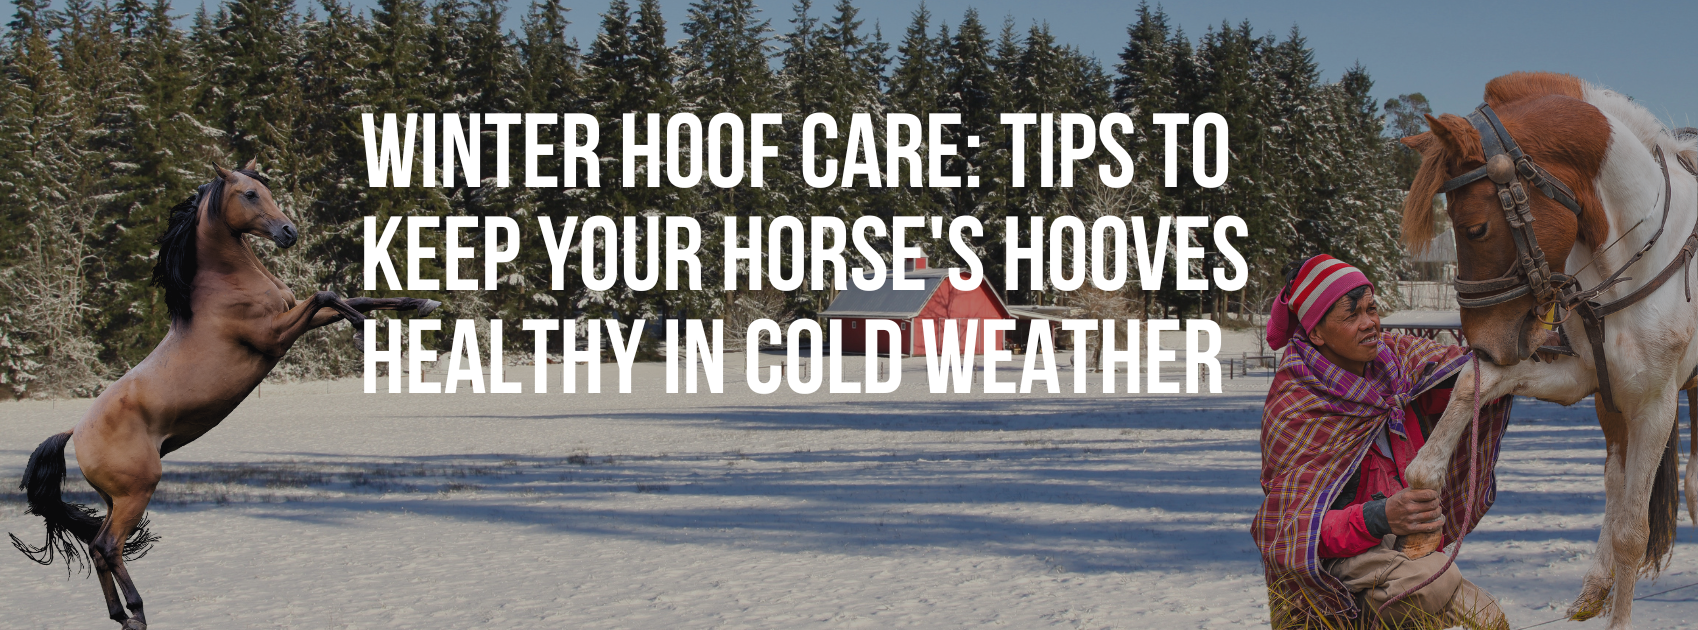 Winter Hoof Care: Tips to Keep Your Horse's Hooves Healthy in Cold Weather